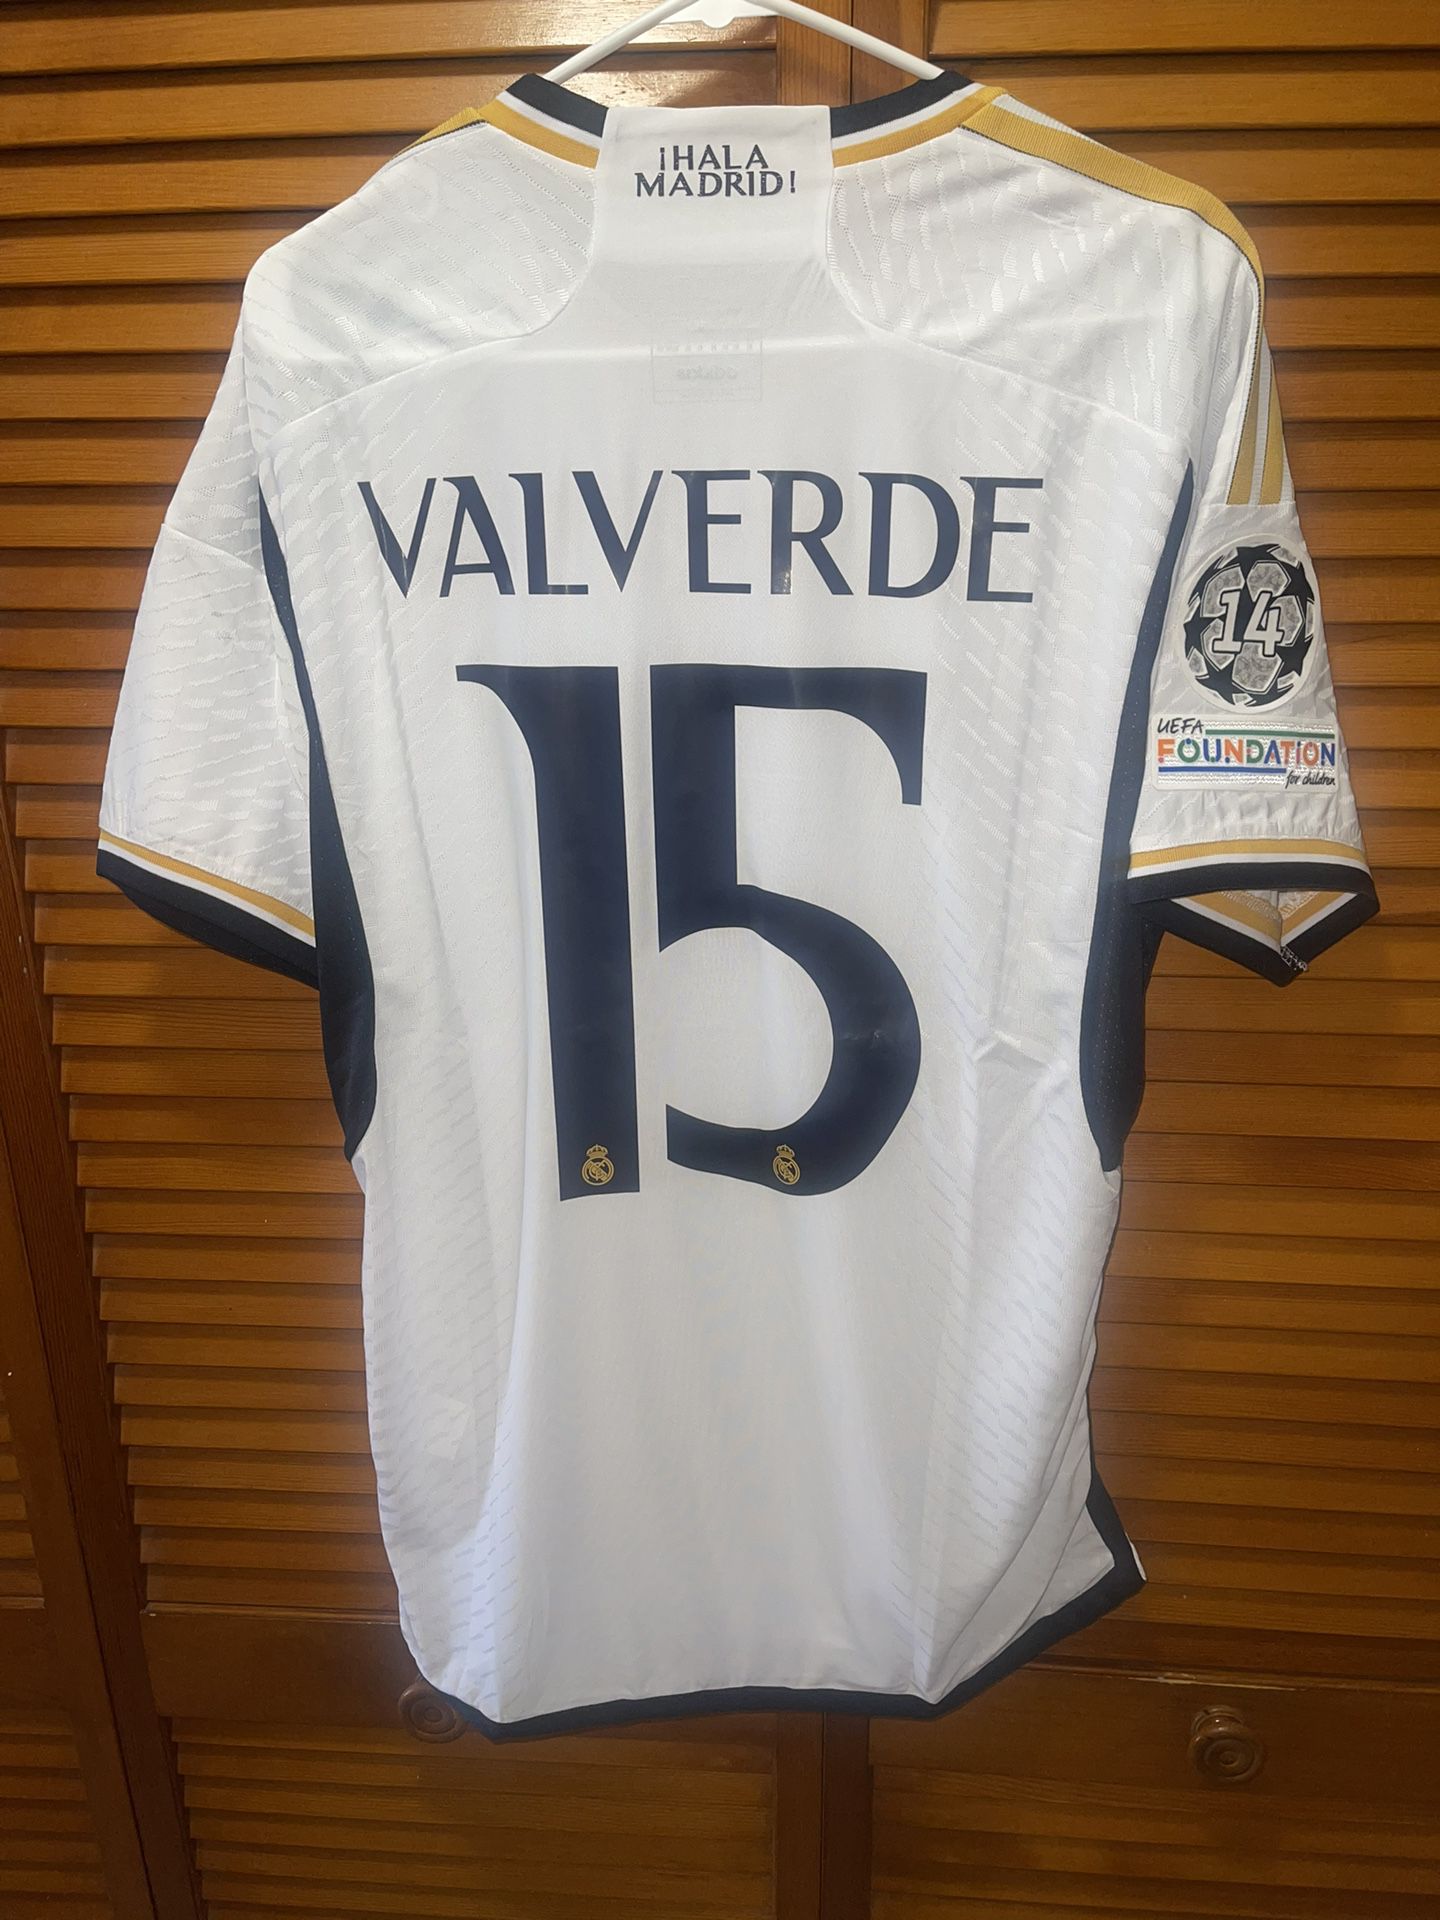 Real Madrid Home Player Version Jersey Valverde X-Large